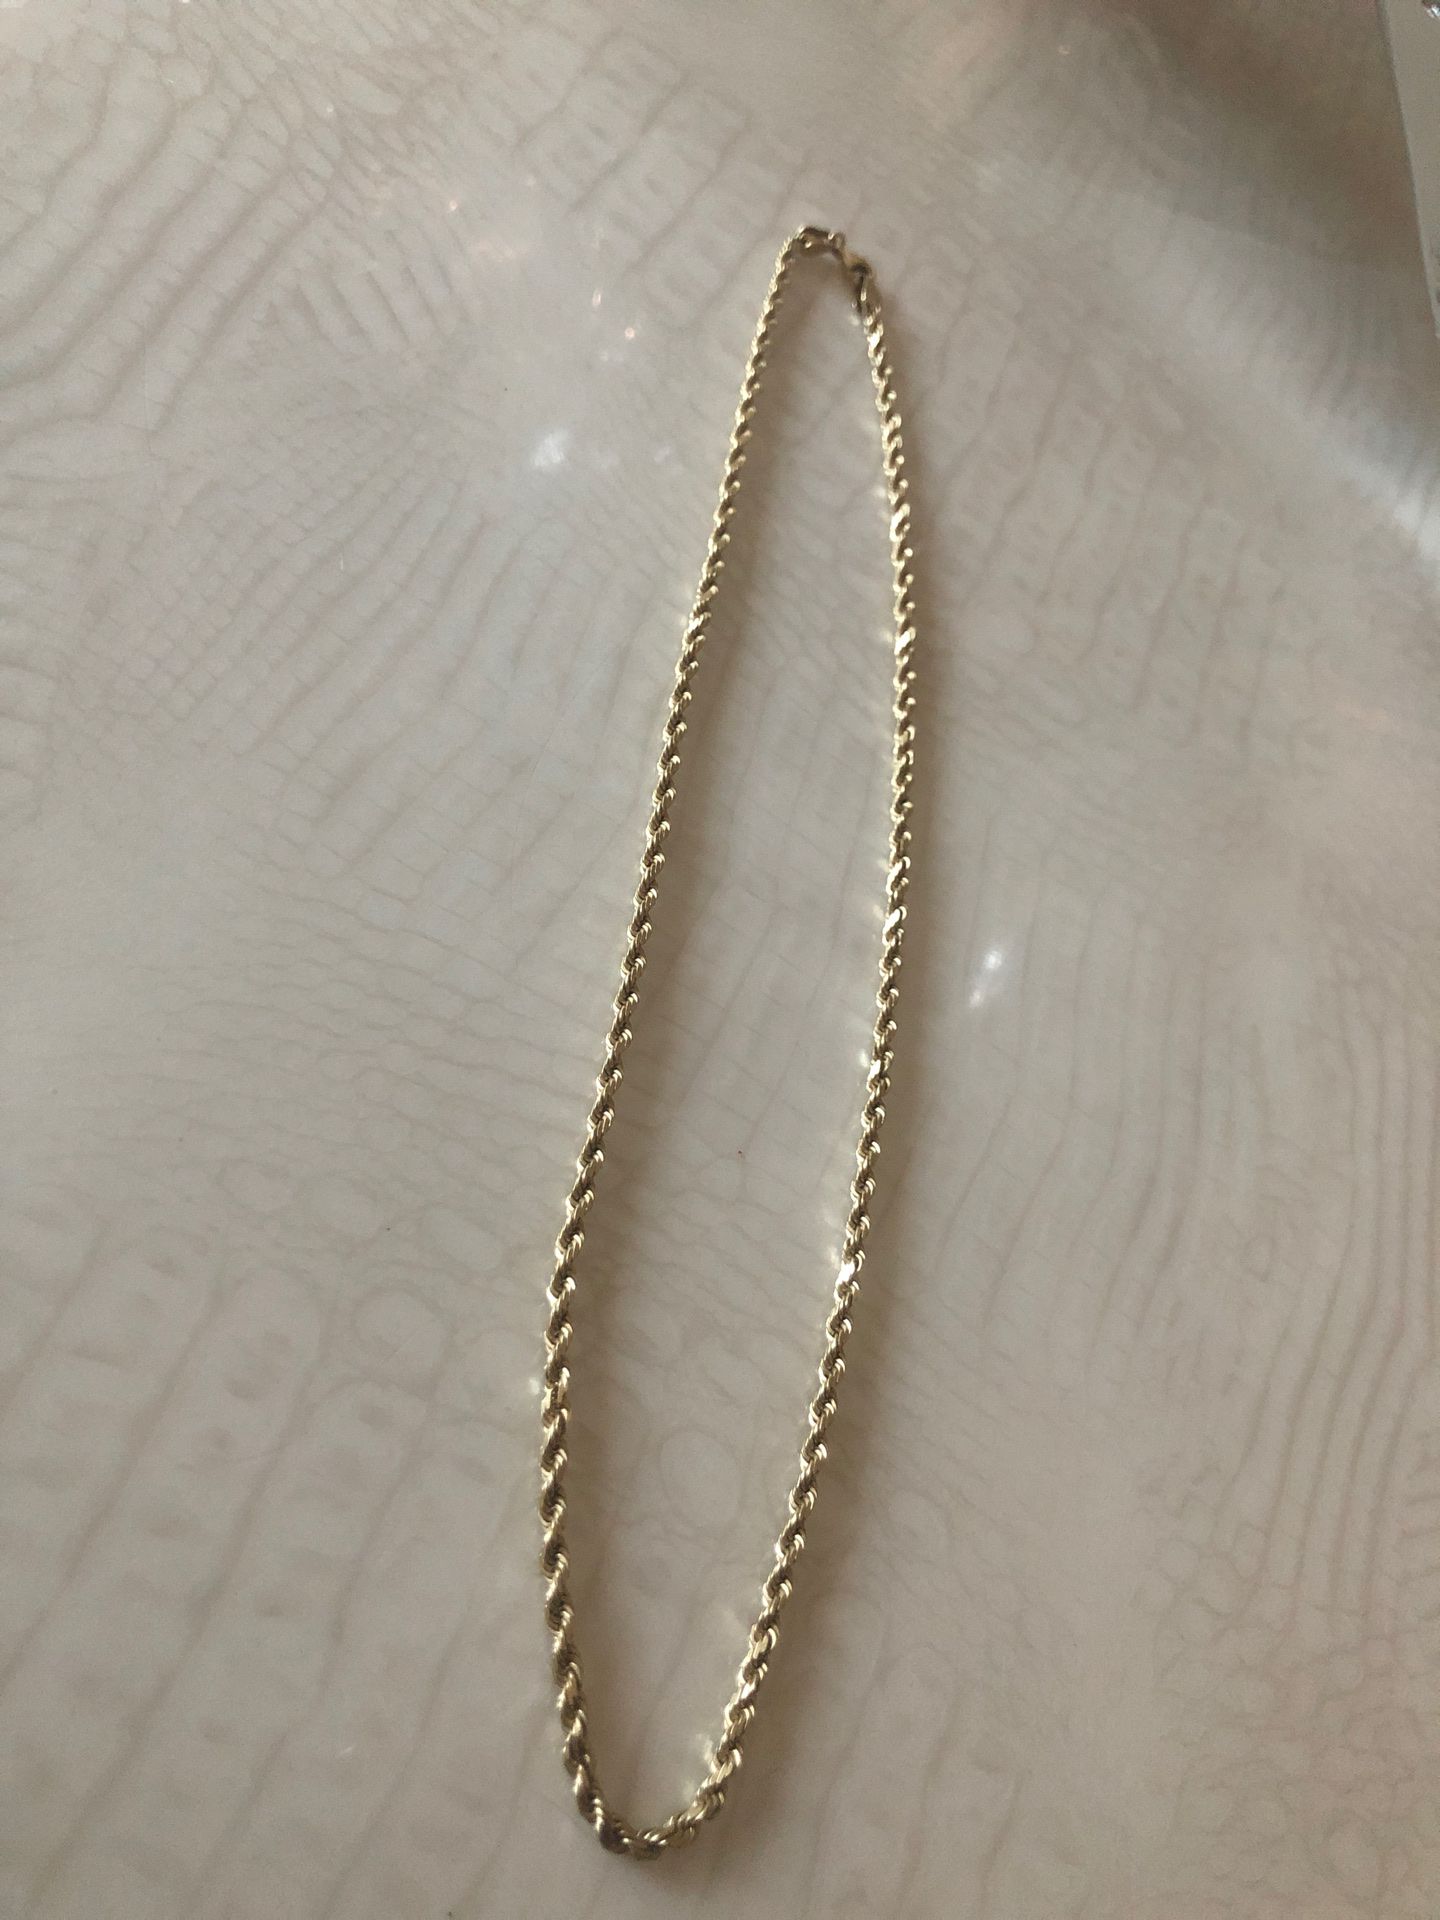 10k solid gold necklace